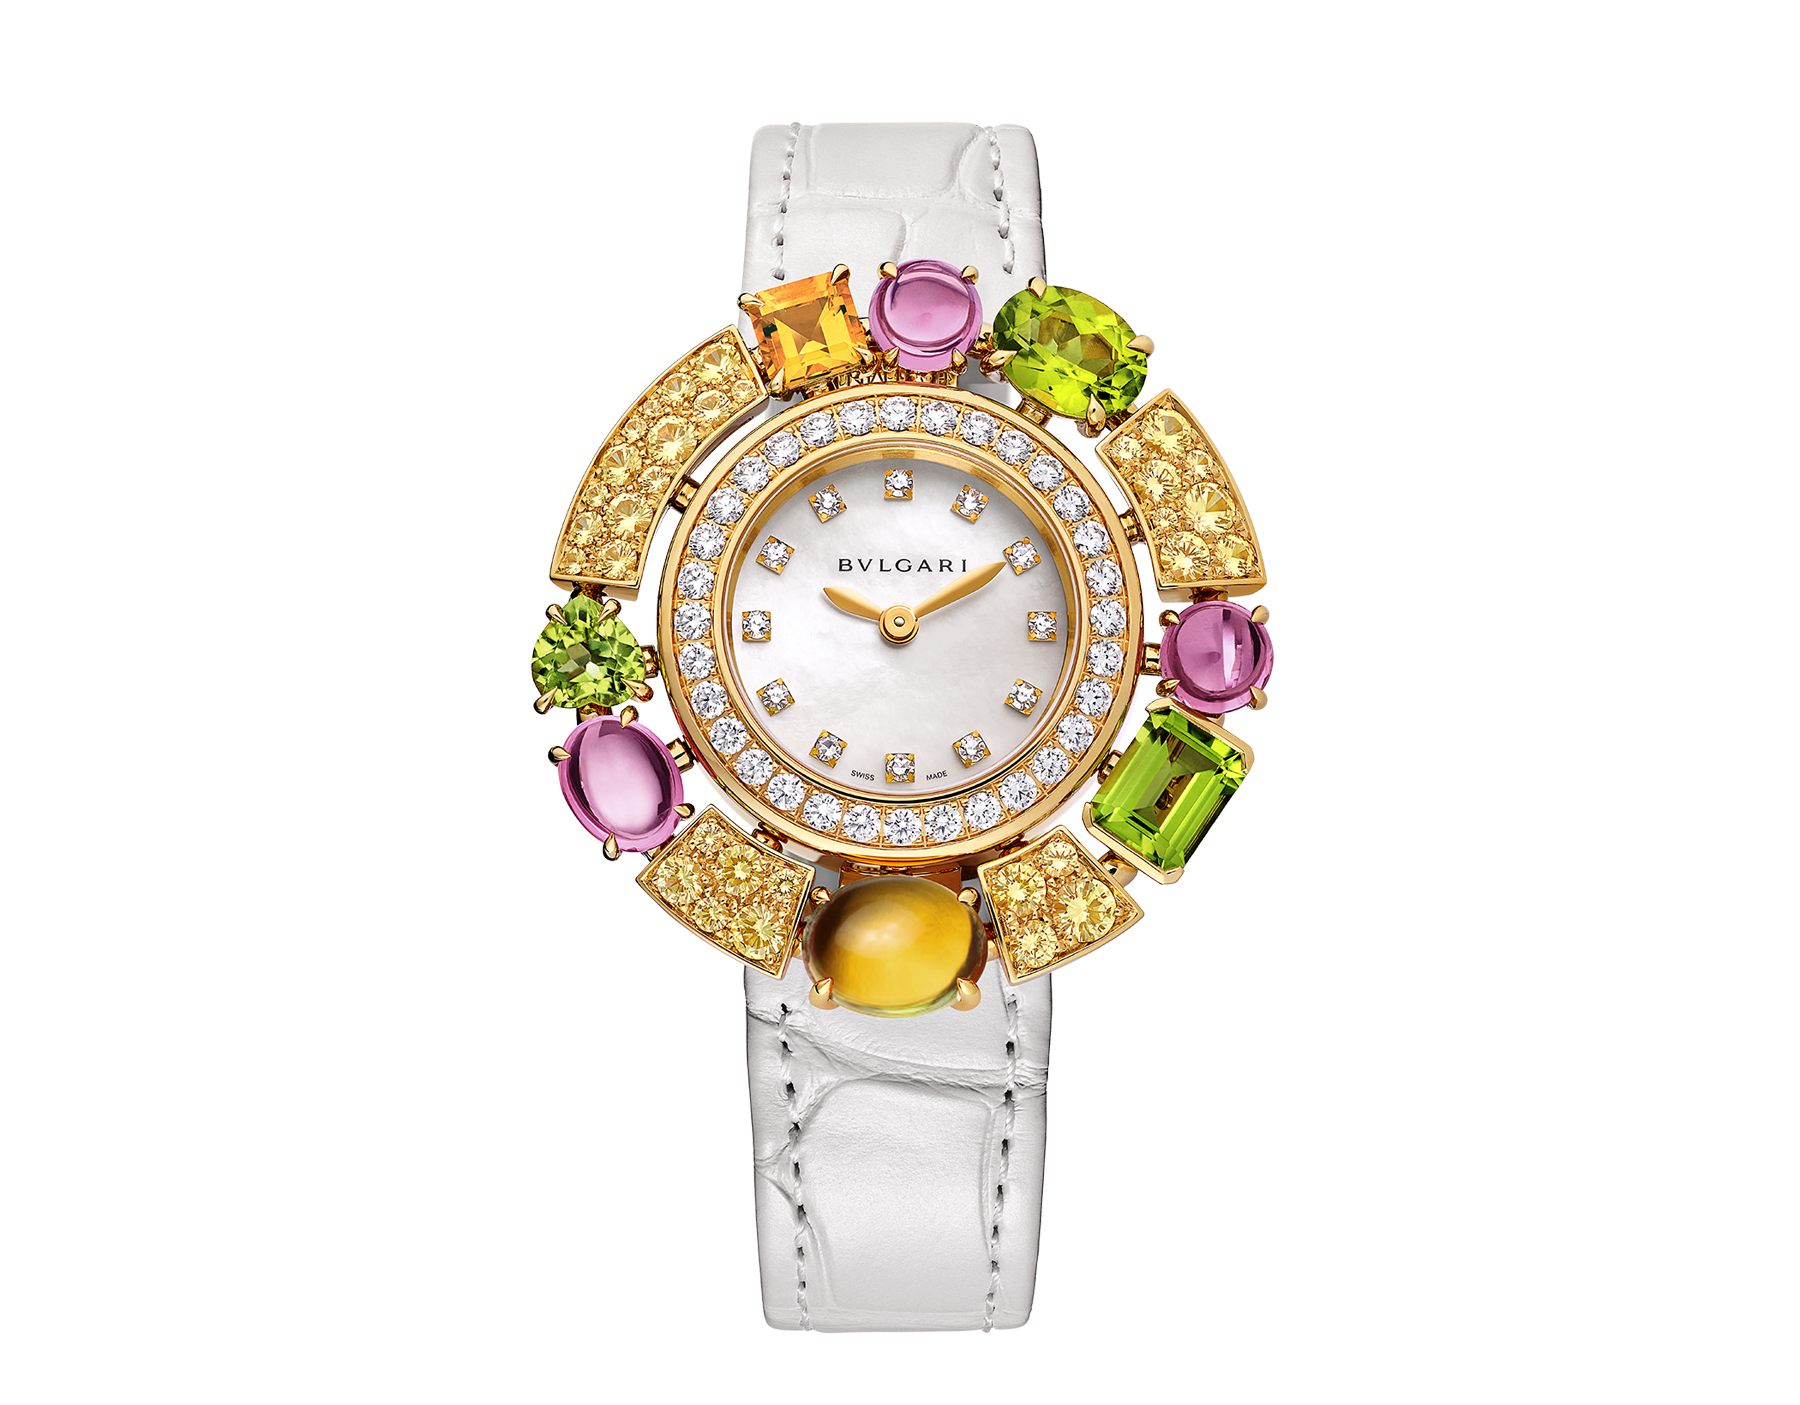 Allegra watch with 18 kt rose gold case set with brilliant-cut diamonds, 32 yellow sapphires, 3 pink tourmalines, 2 citrines and 3 peridots, mother-of-pearl dial, 12 diamond indexes and a white iridescent alligator bracelet. Water-resistant up to 30 meters 103714 image 1